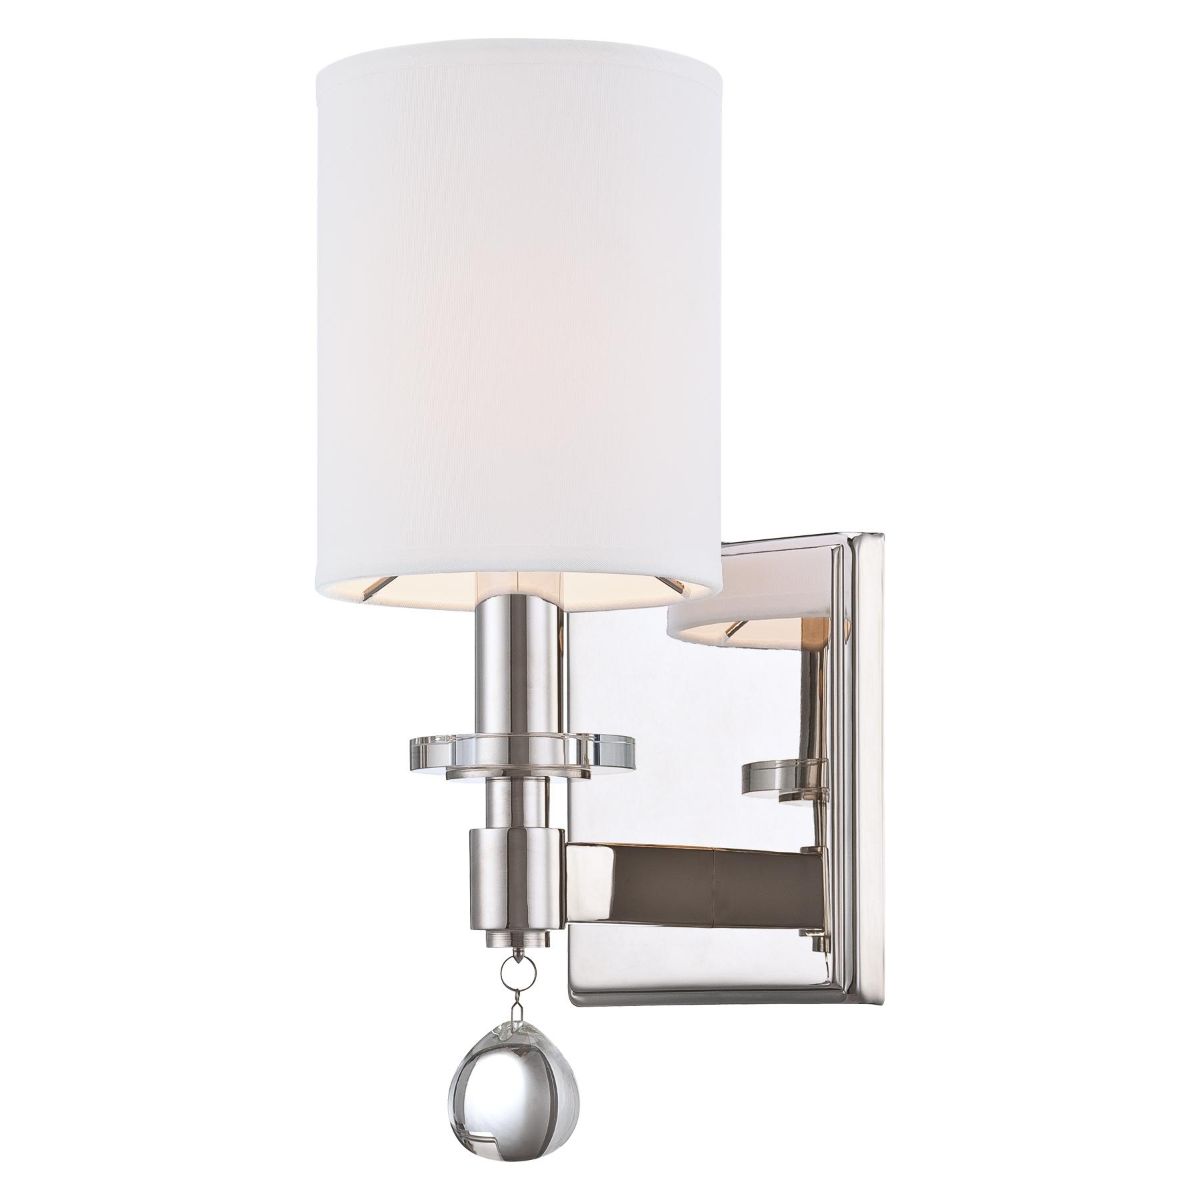 Chadbourne 13 in. Armed Sconce Polished Nickel finish